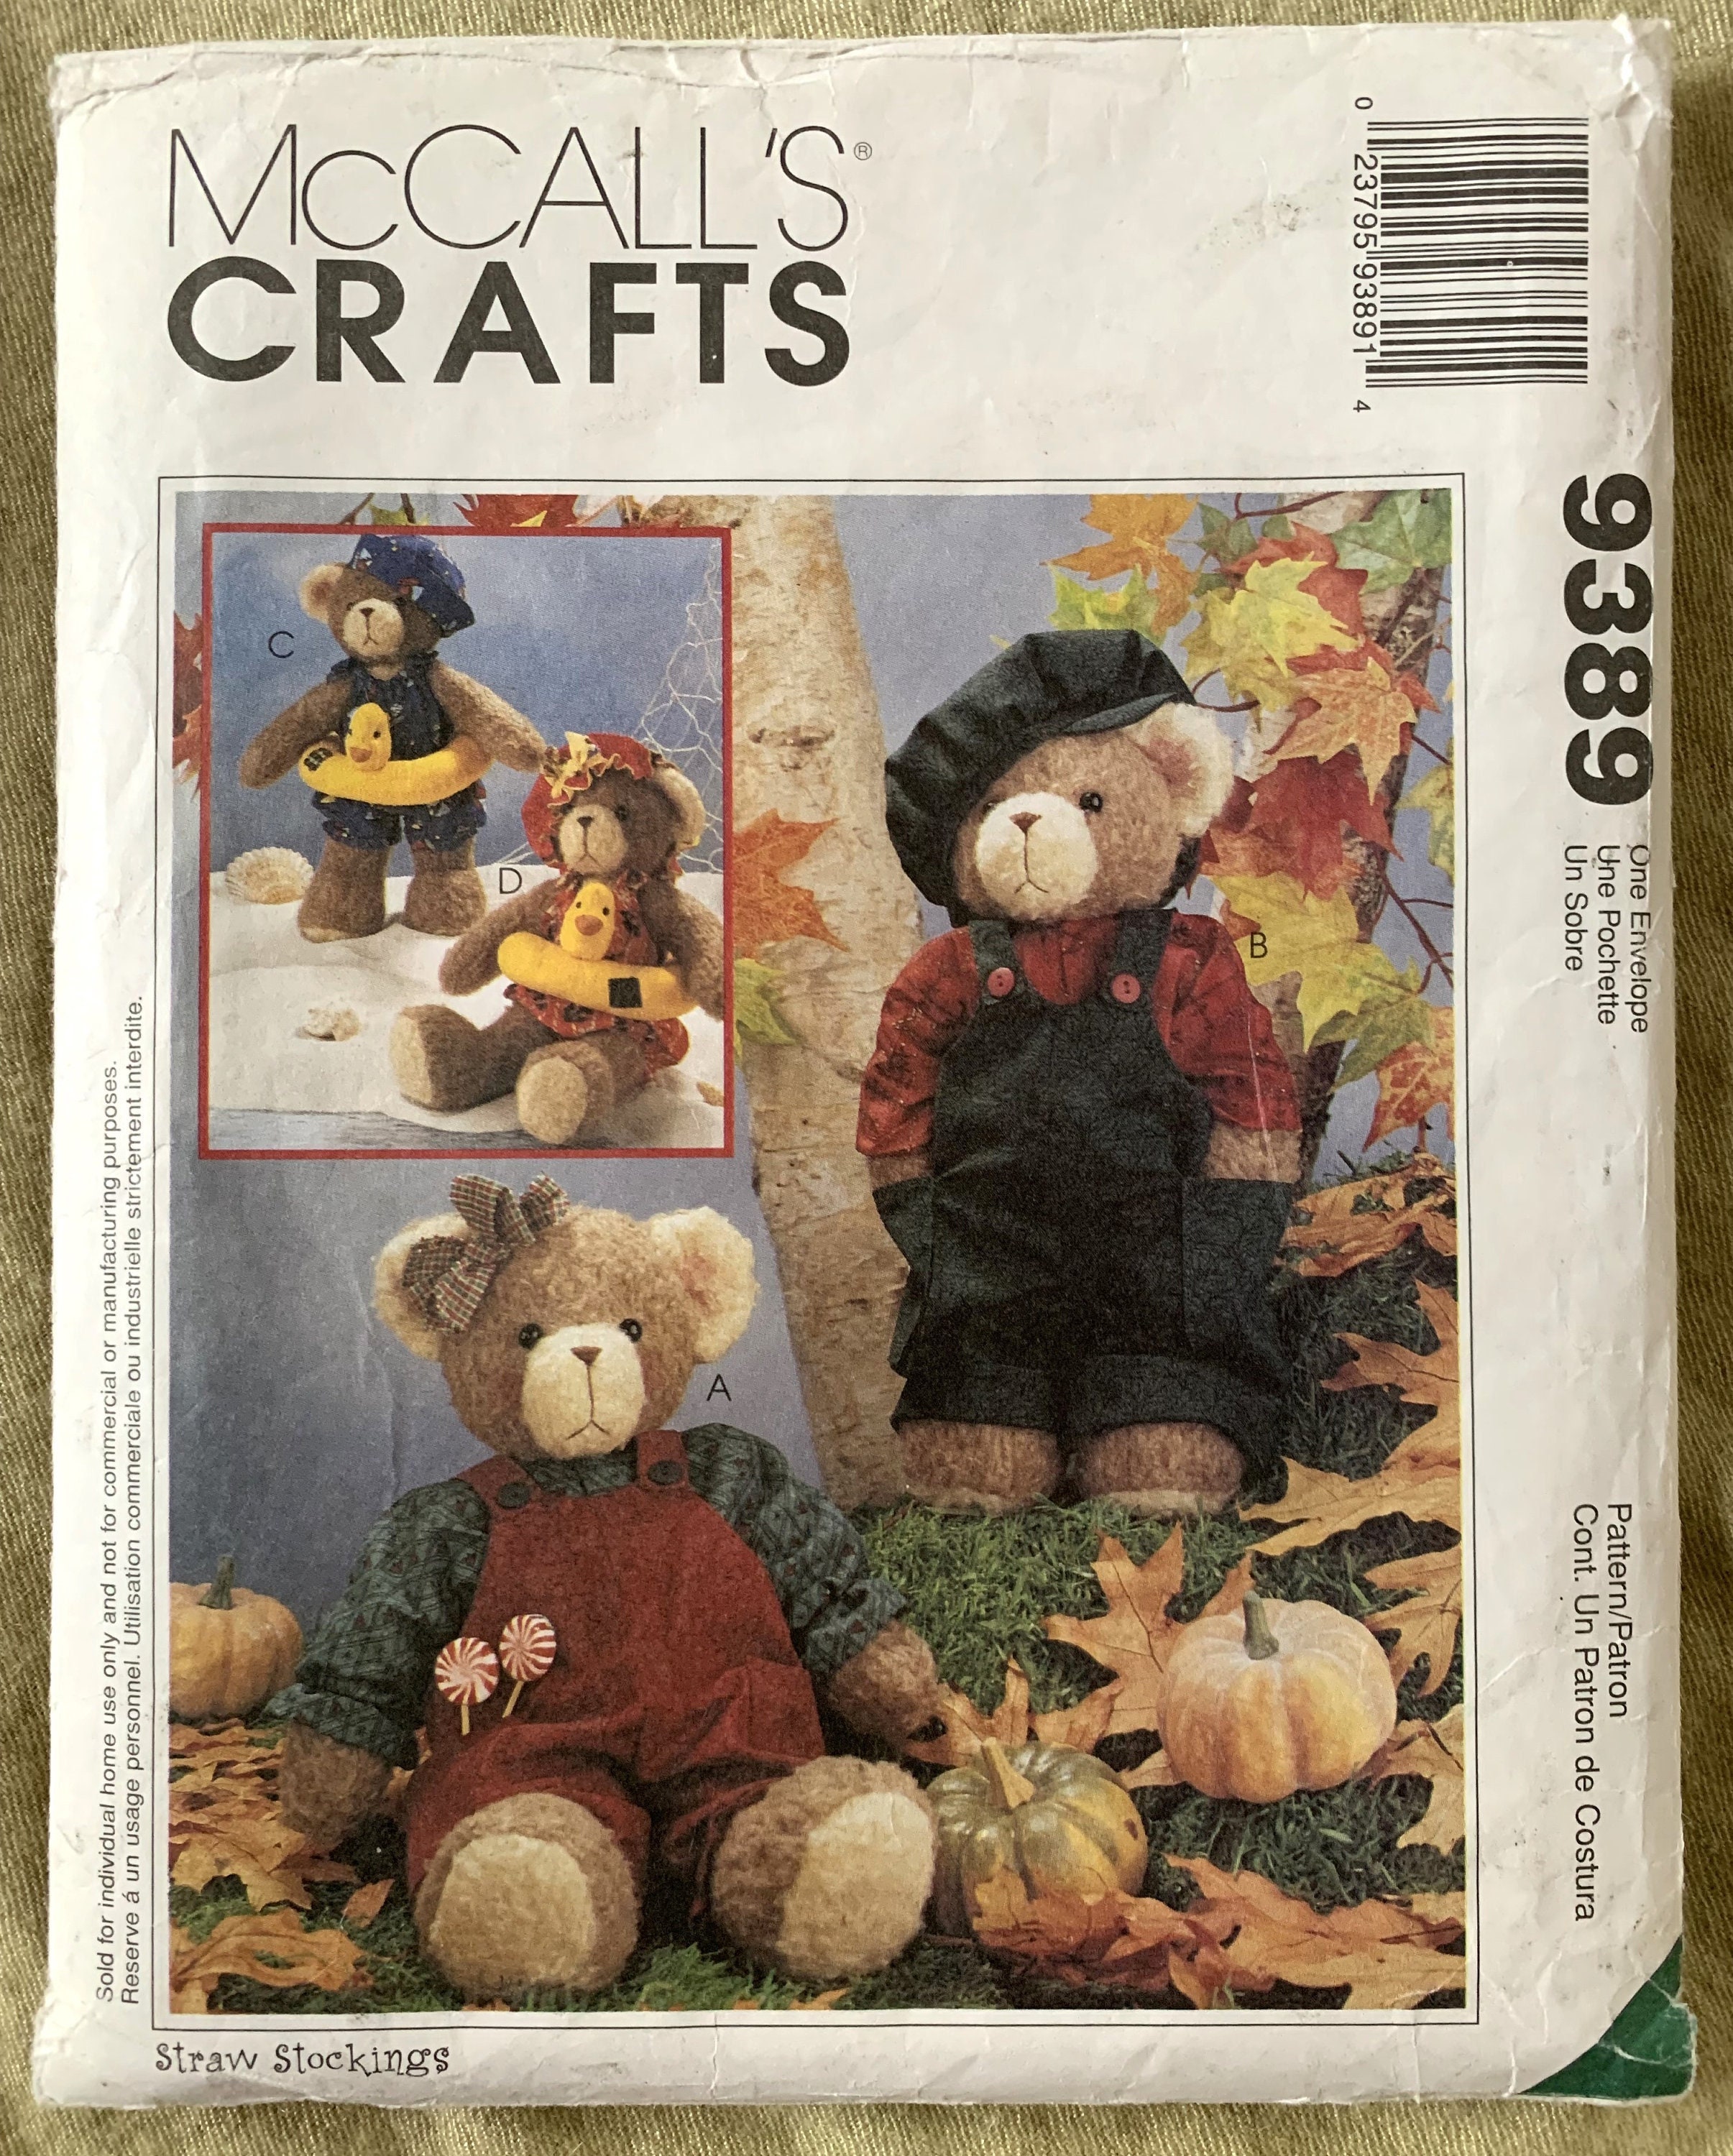  McCall's Sewing Pattern L9547 ML9547 Stuffed 18 Easy Bear Vest  Memory Bear : Arts, Crafts & Sewing